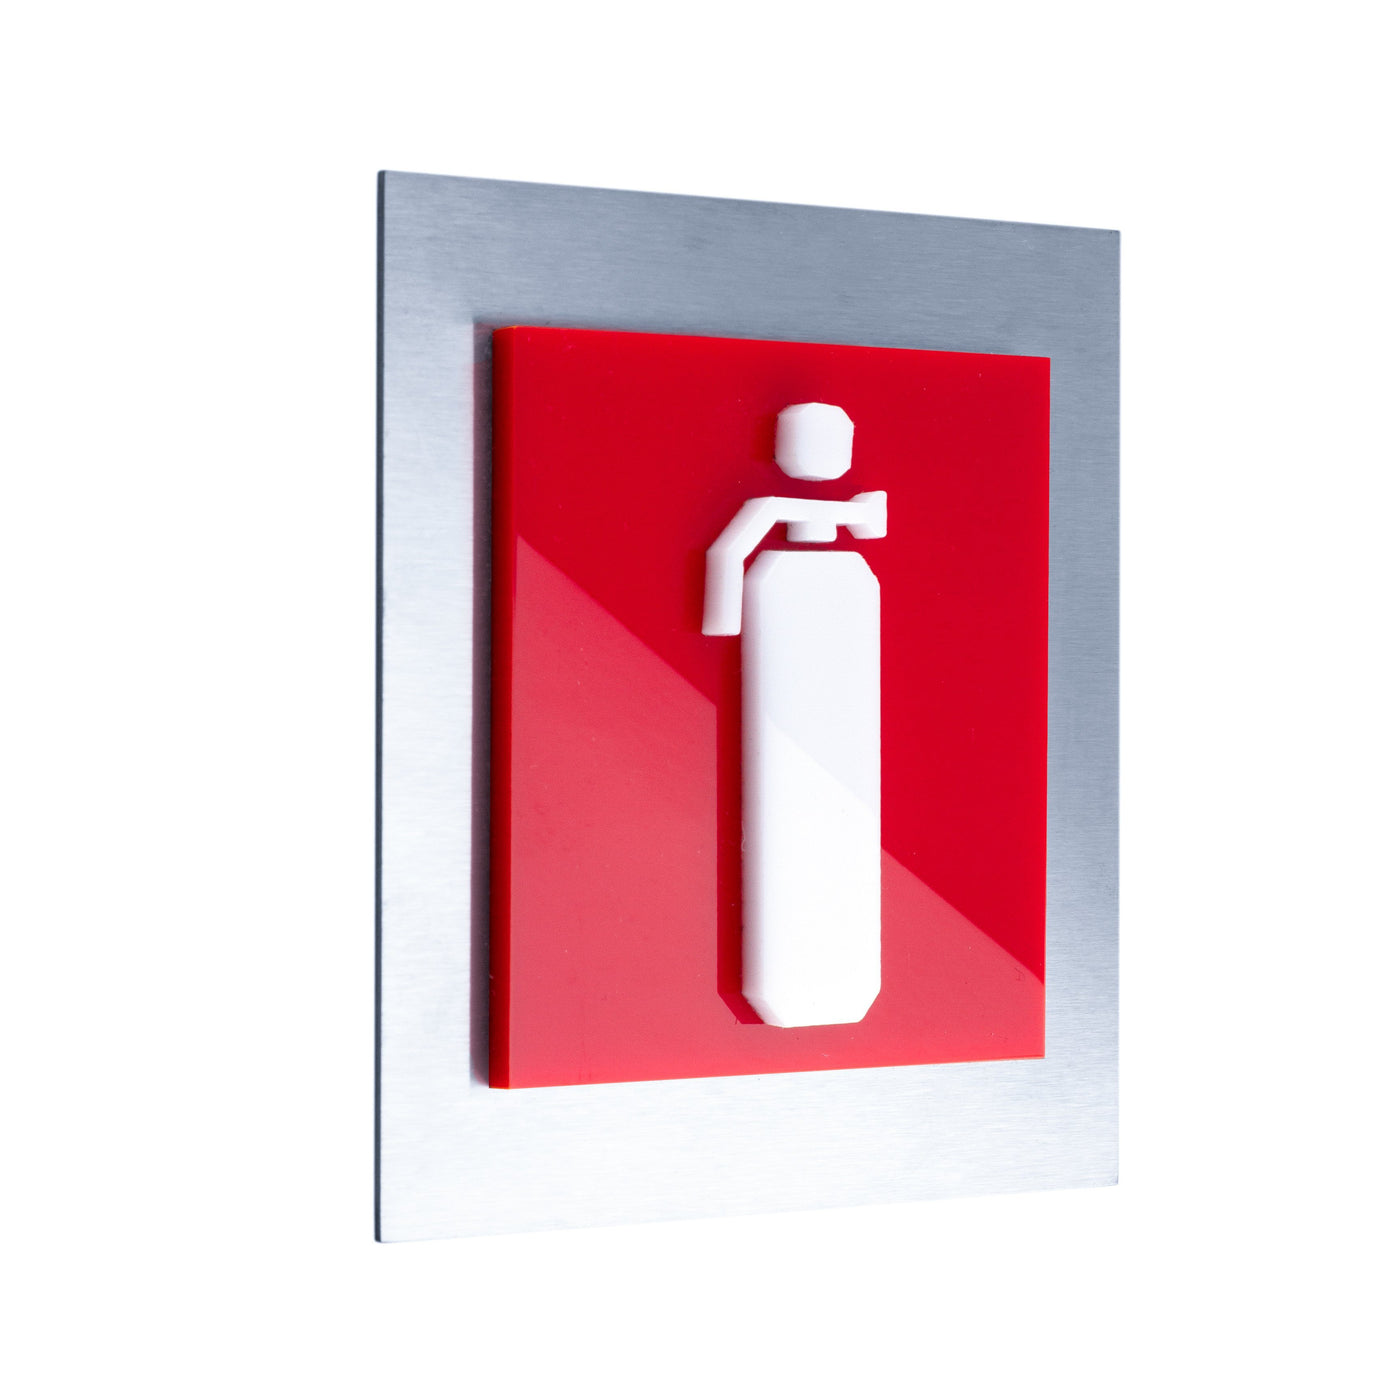 Extinguisher Steel Safety Signage Information signs gray/red/white Bsign